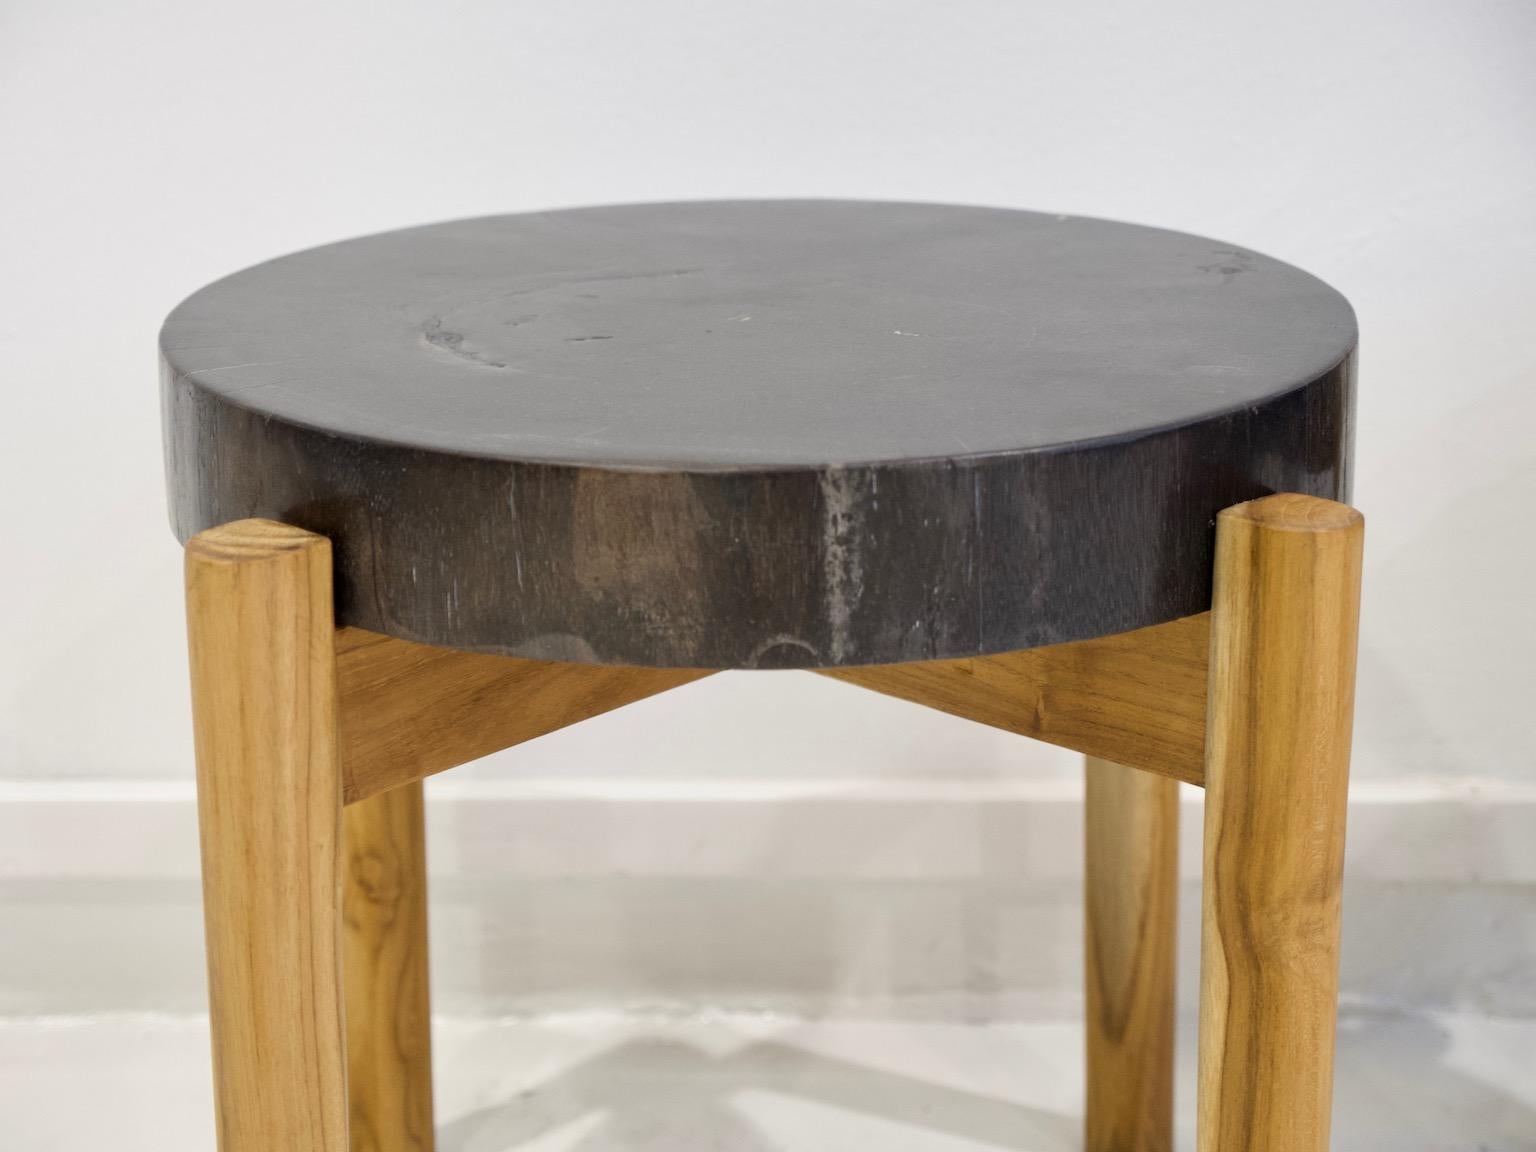 Organic Modern Pair of Side Tables with Wooden Feet and Dark Petrified Wood Top